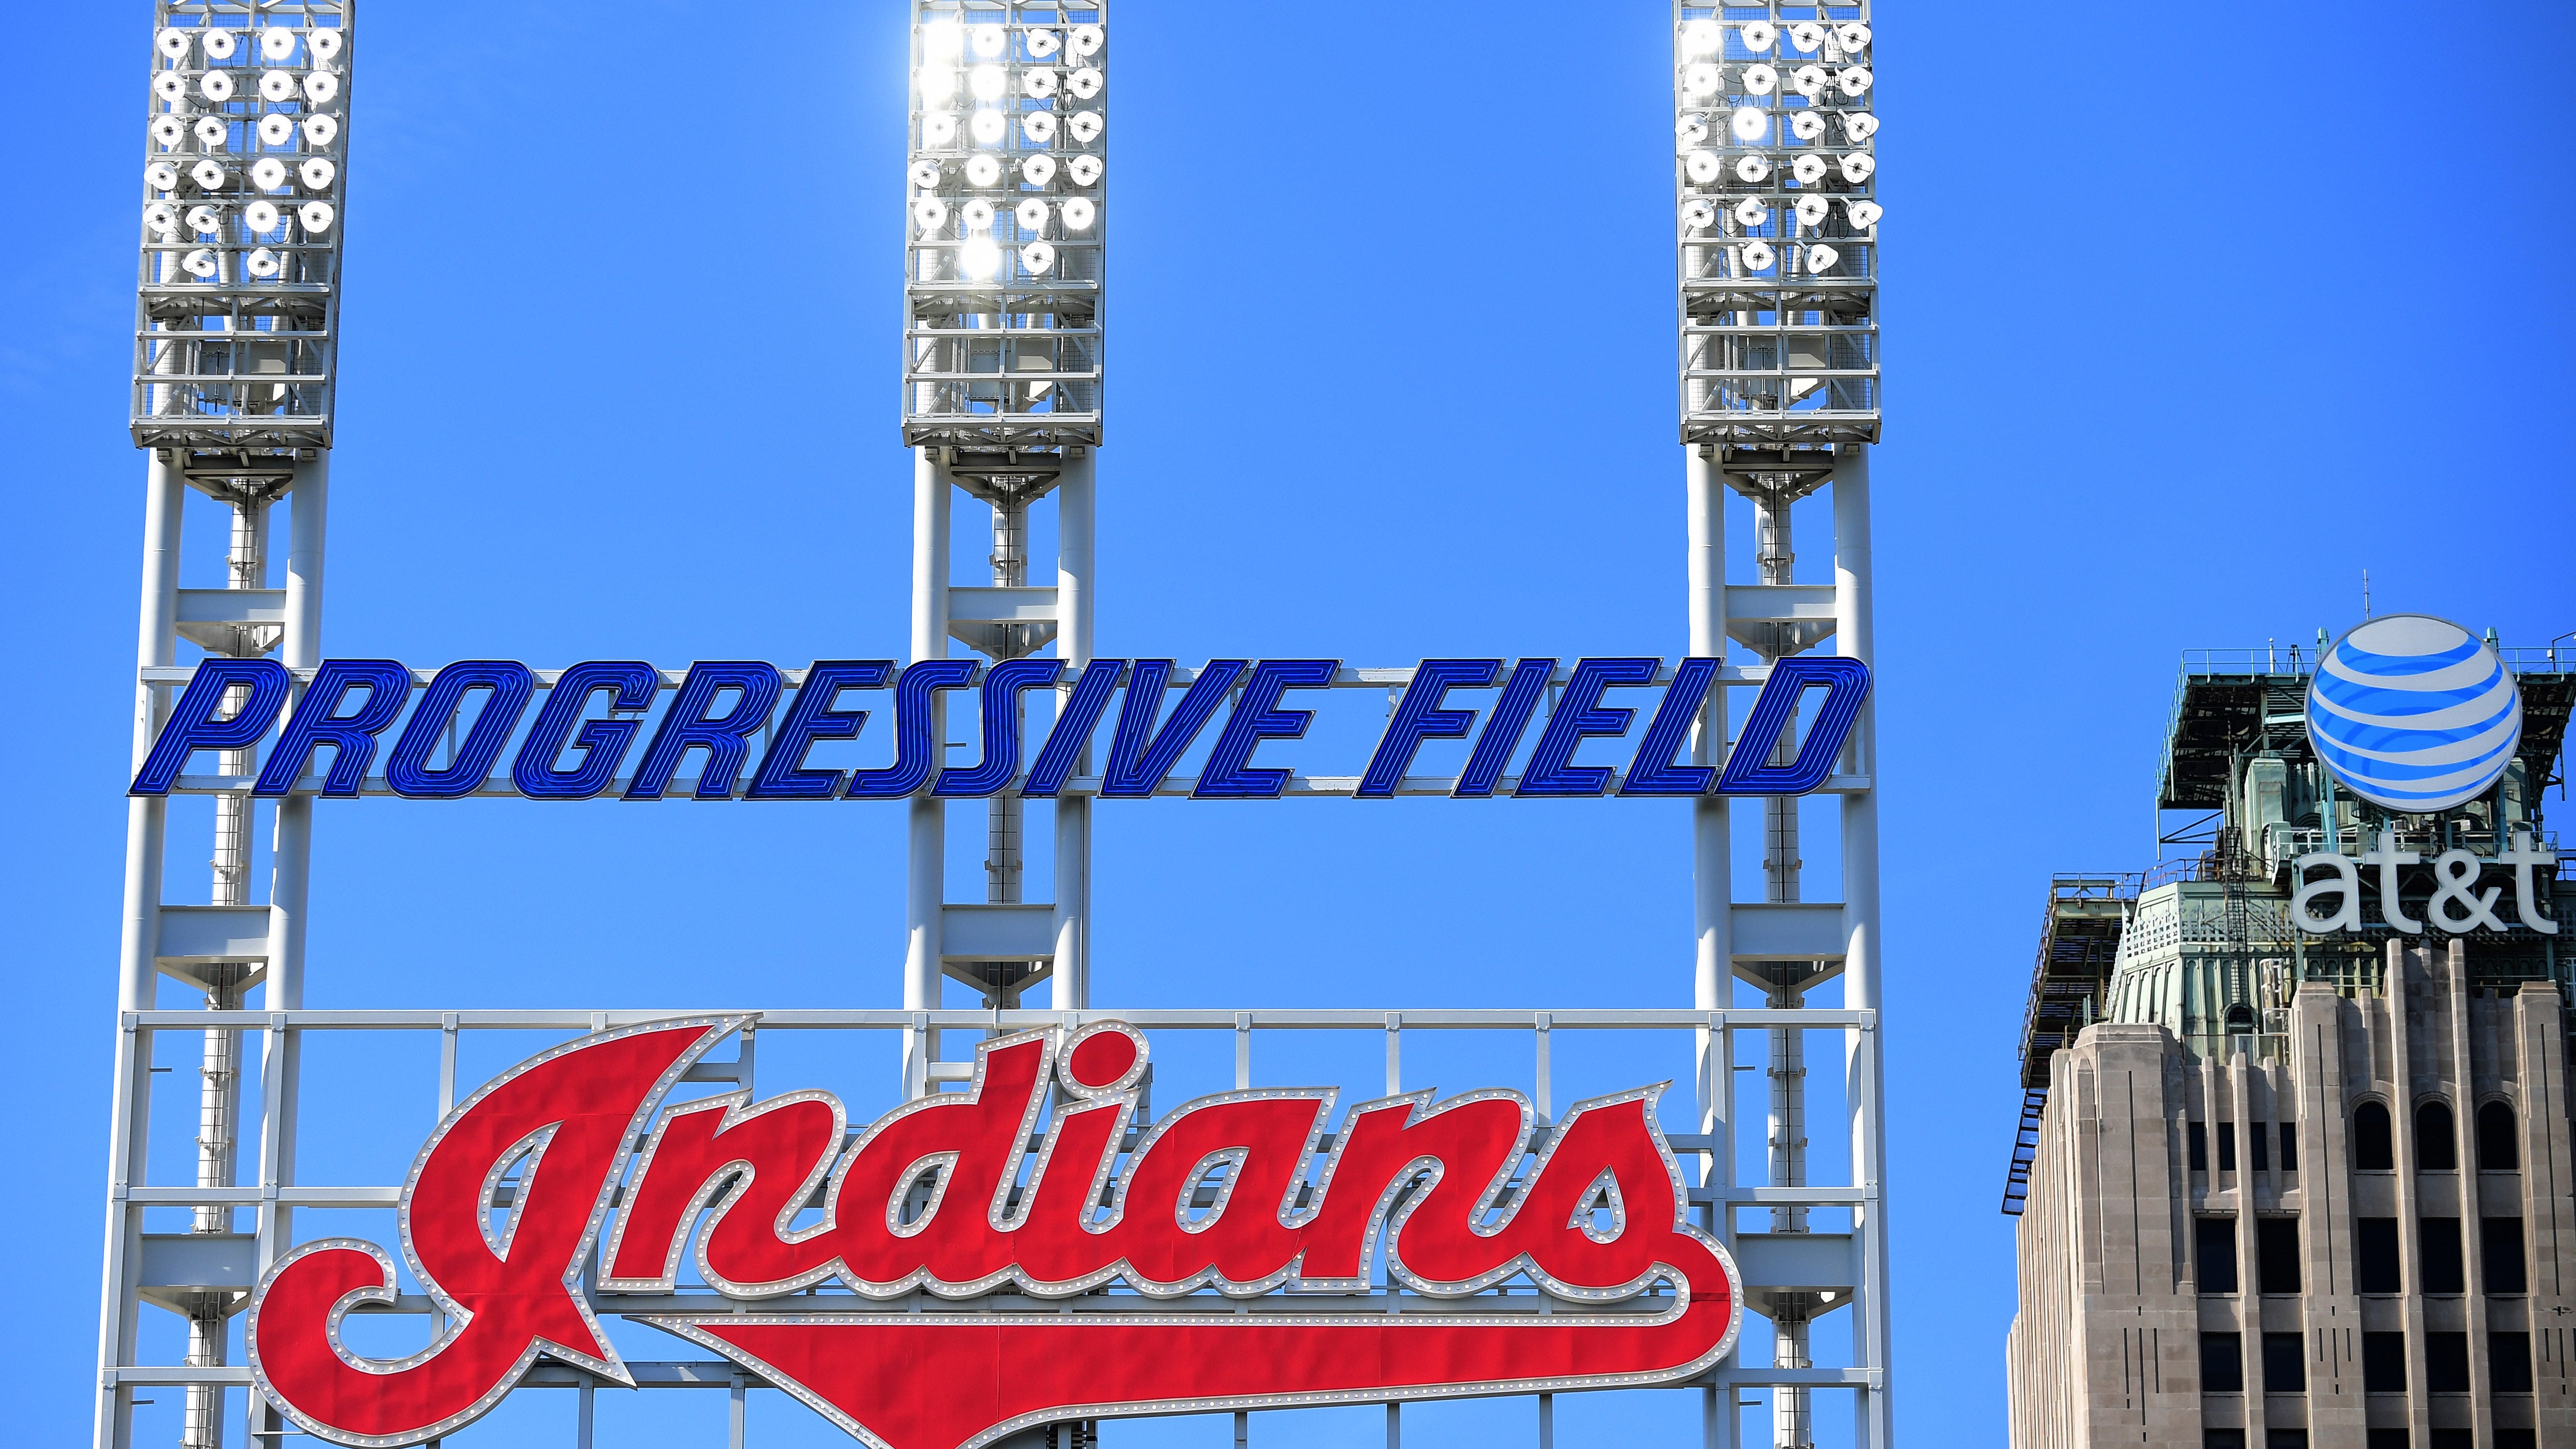 MLB: Cleveland Indians to change name to Guardians for 2022 season